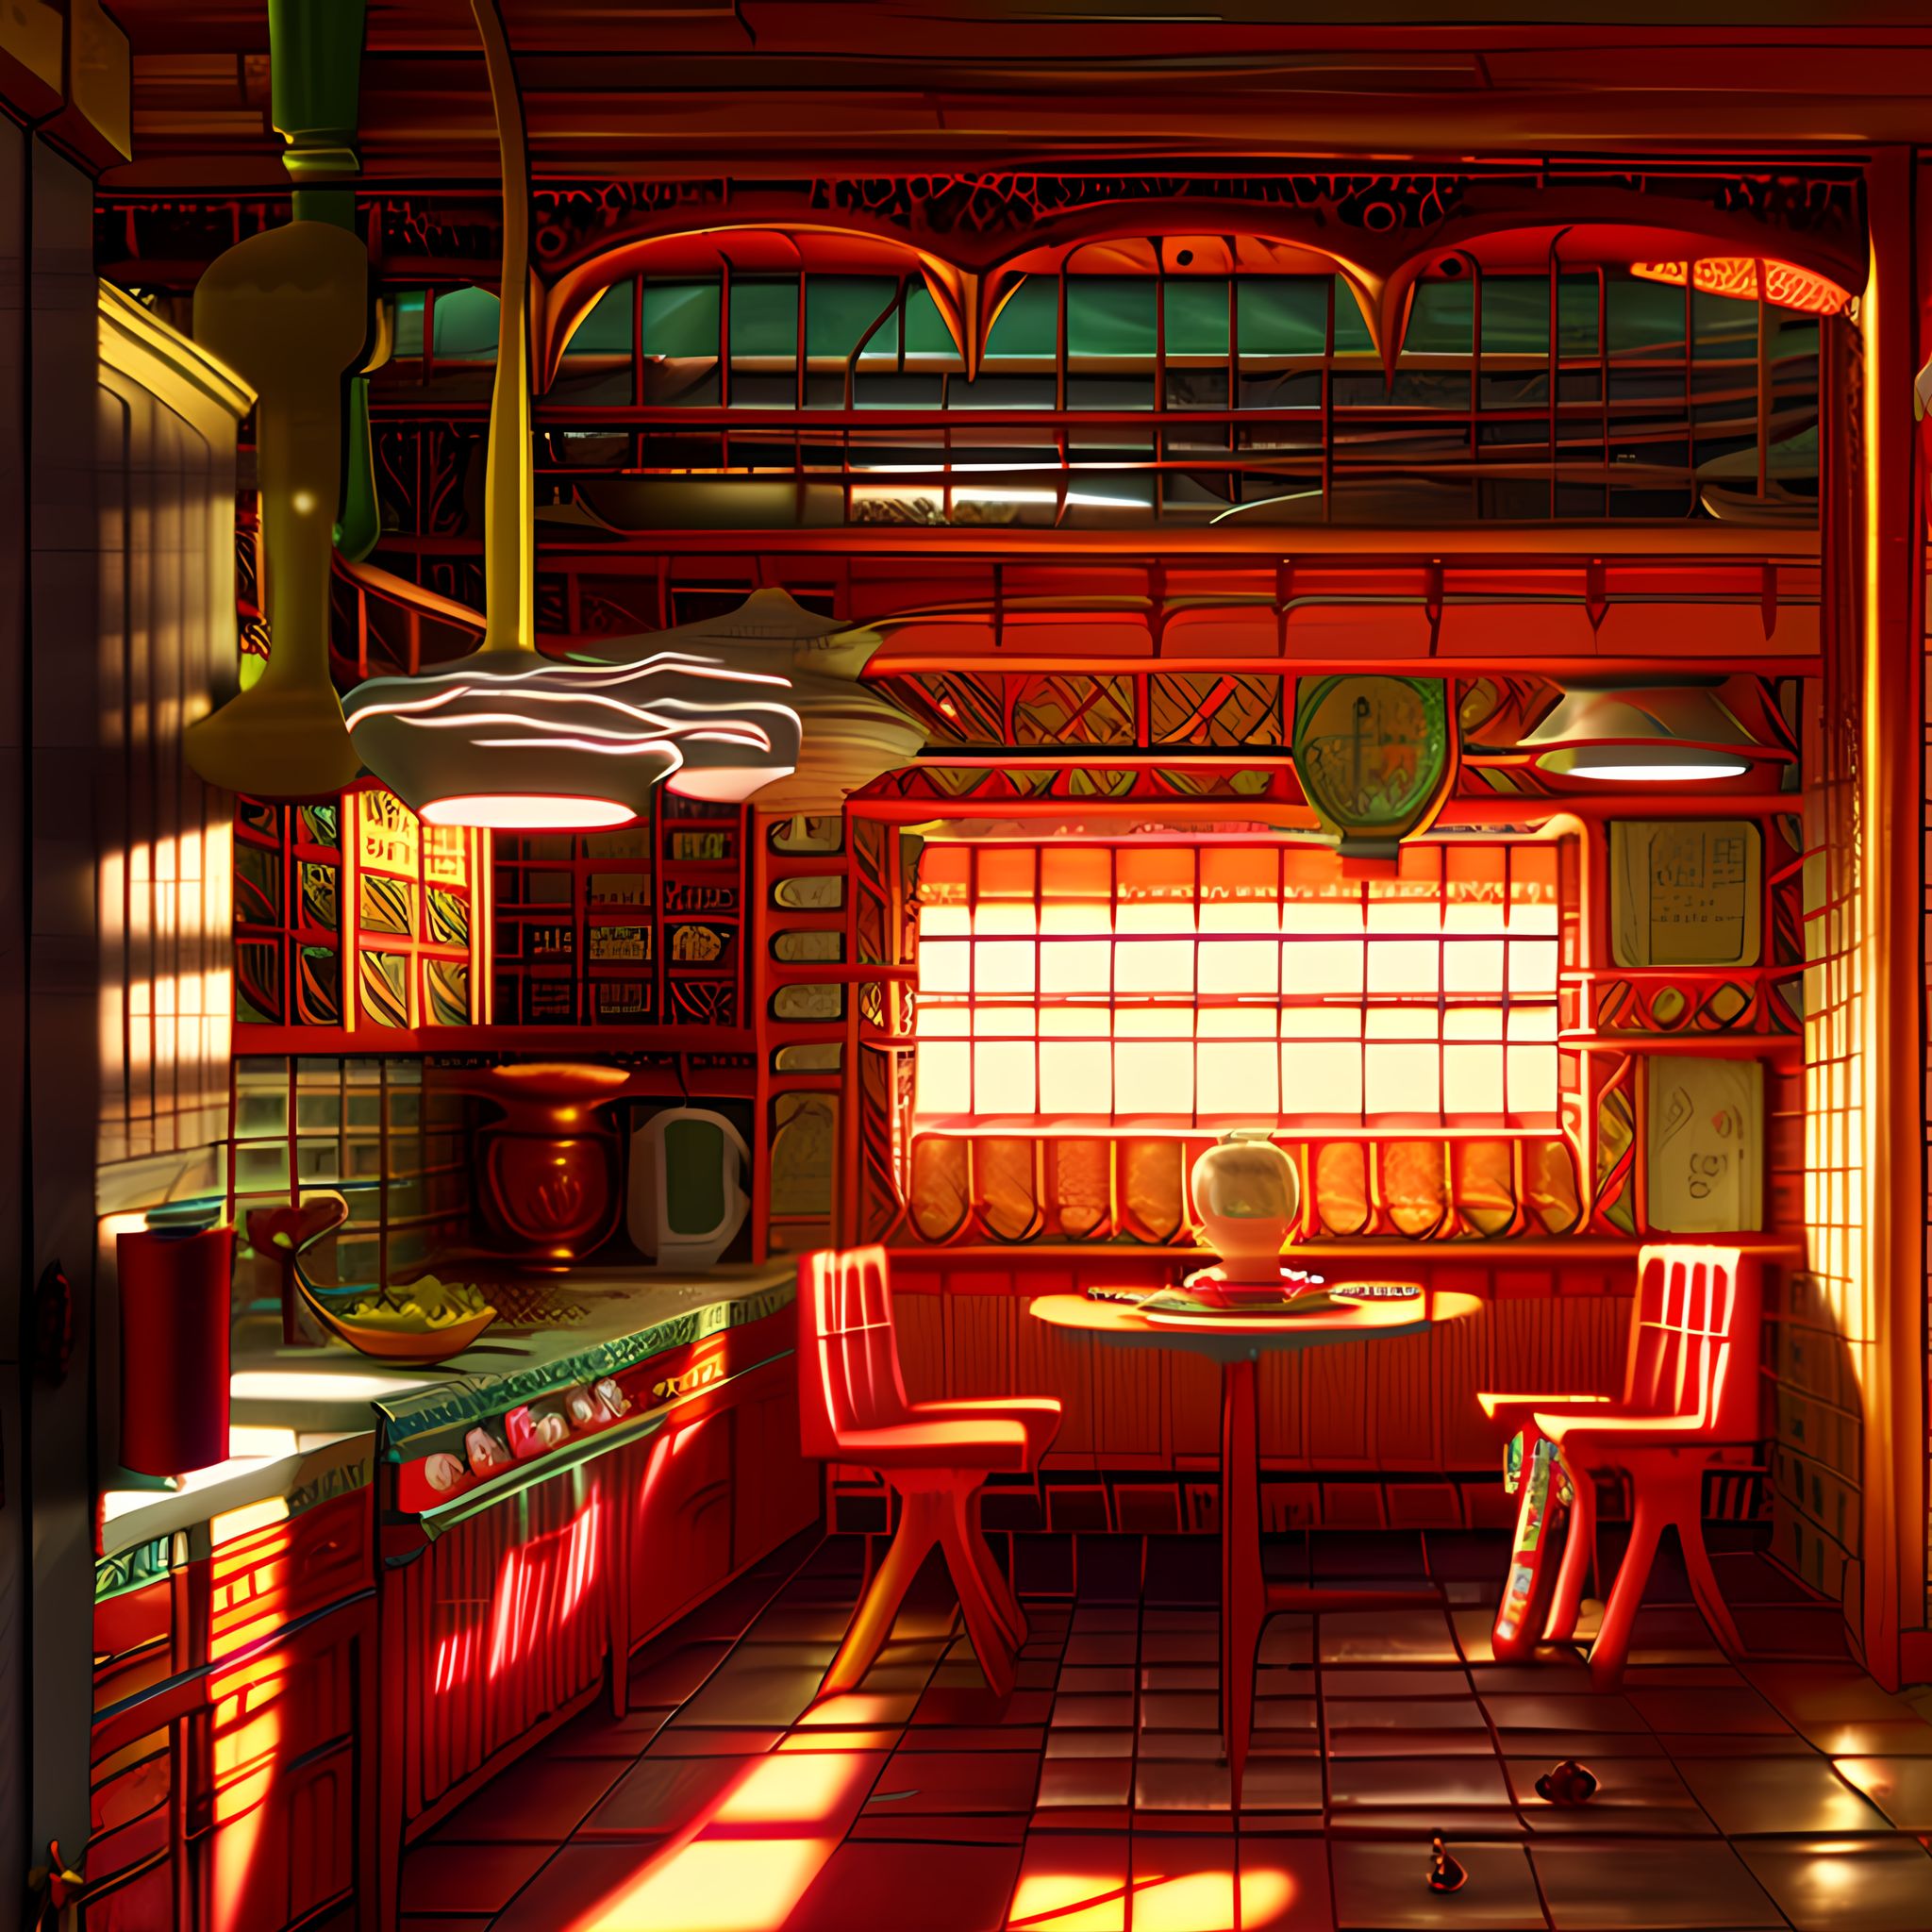 Spirited-Away-directed-by-Wes-Anderson-interior-architecture-kitchen-eating-space-rendered-in-oc-5z6d